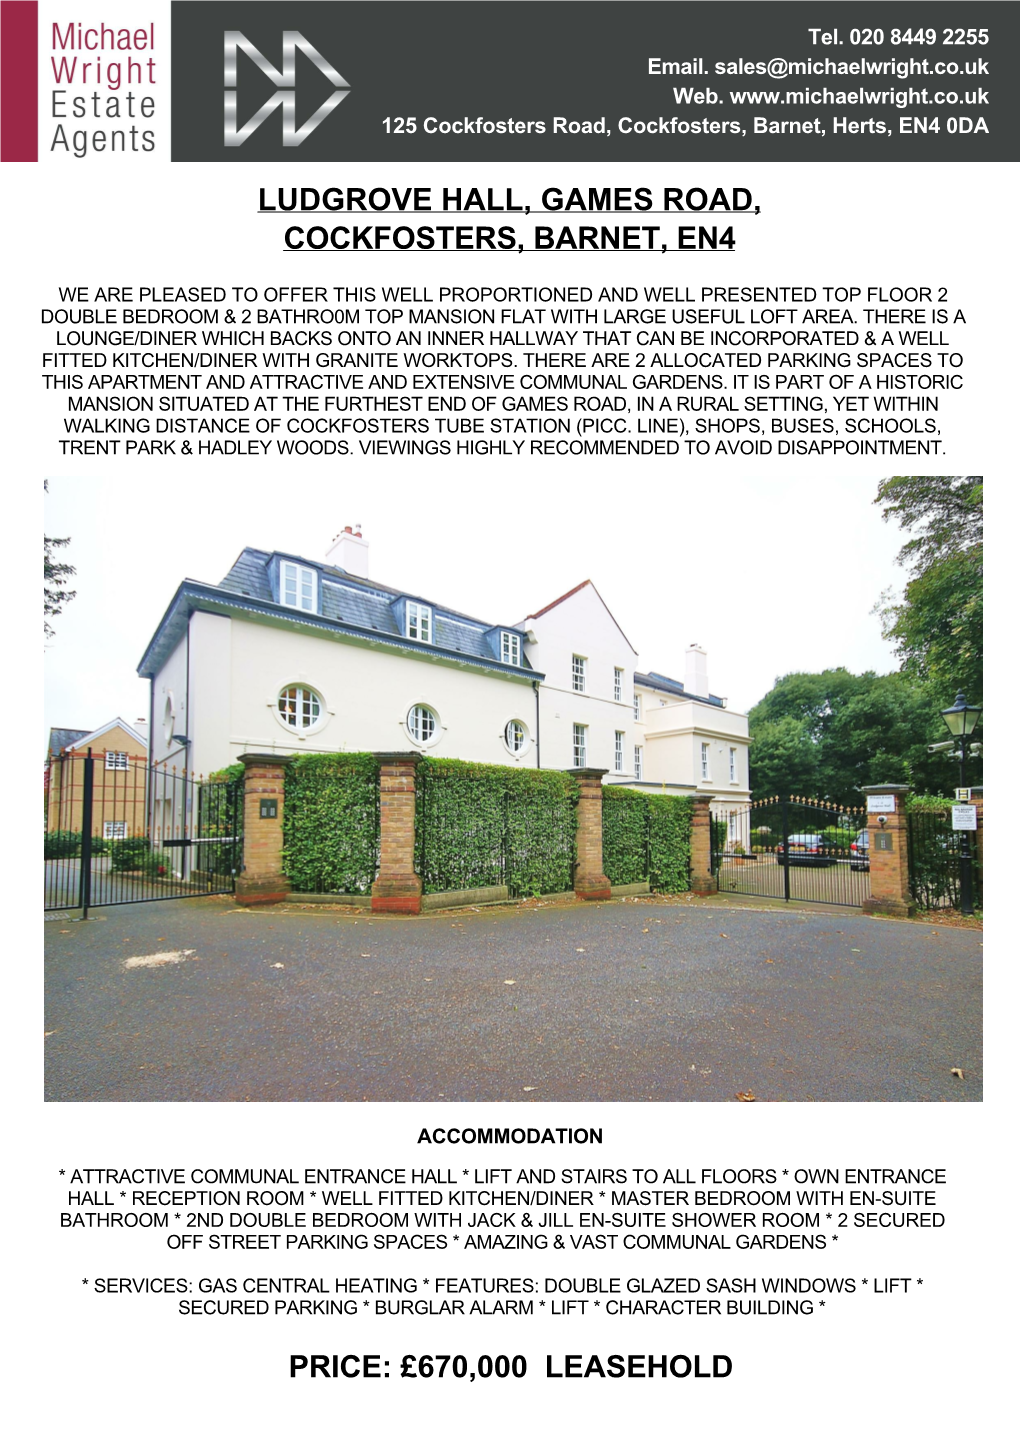 670000 Leasehold Ludgrove Hall, Games Road, Cockfosters, Barnet